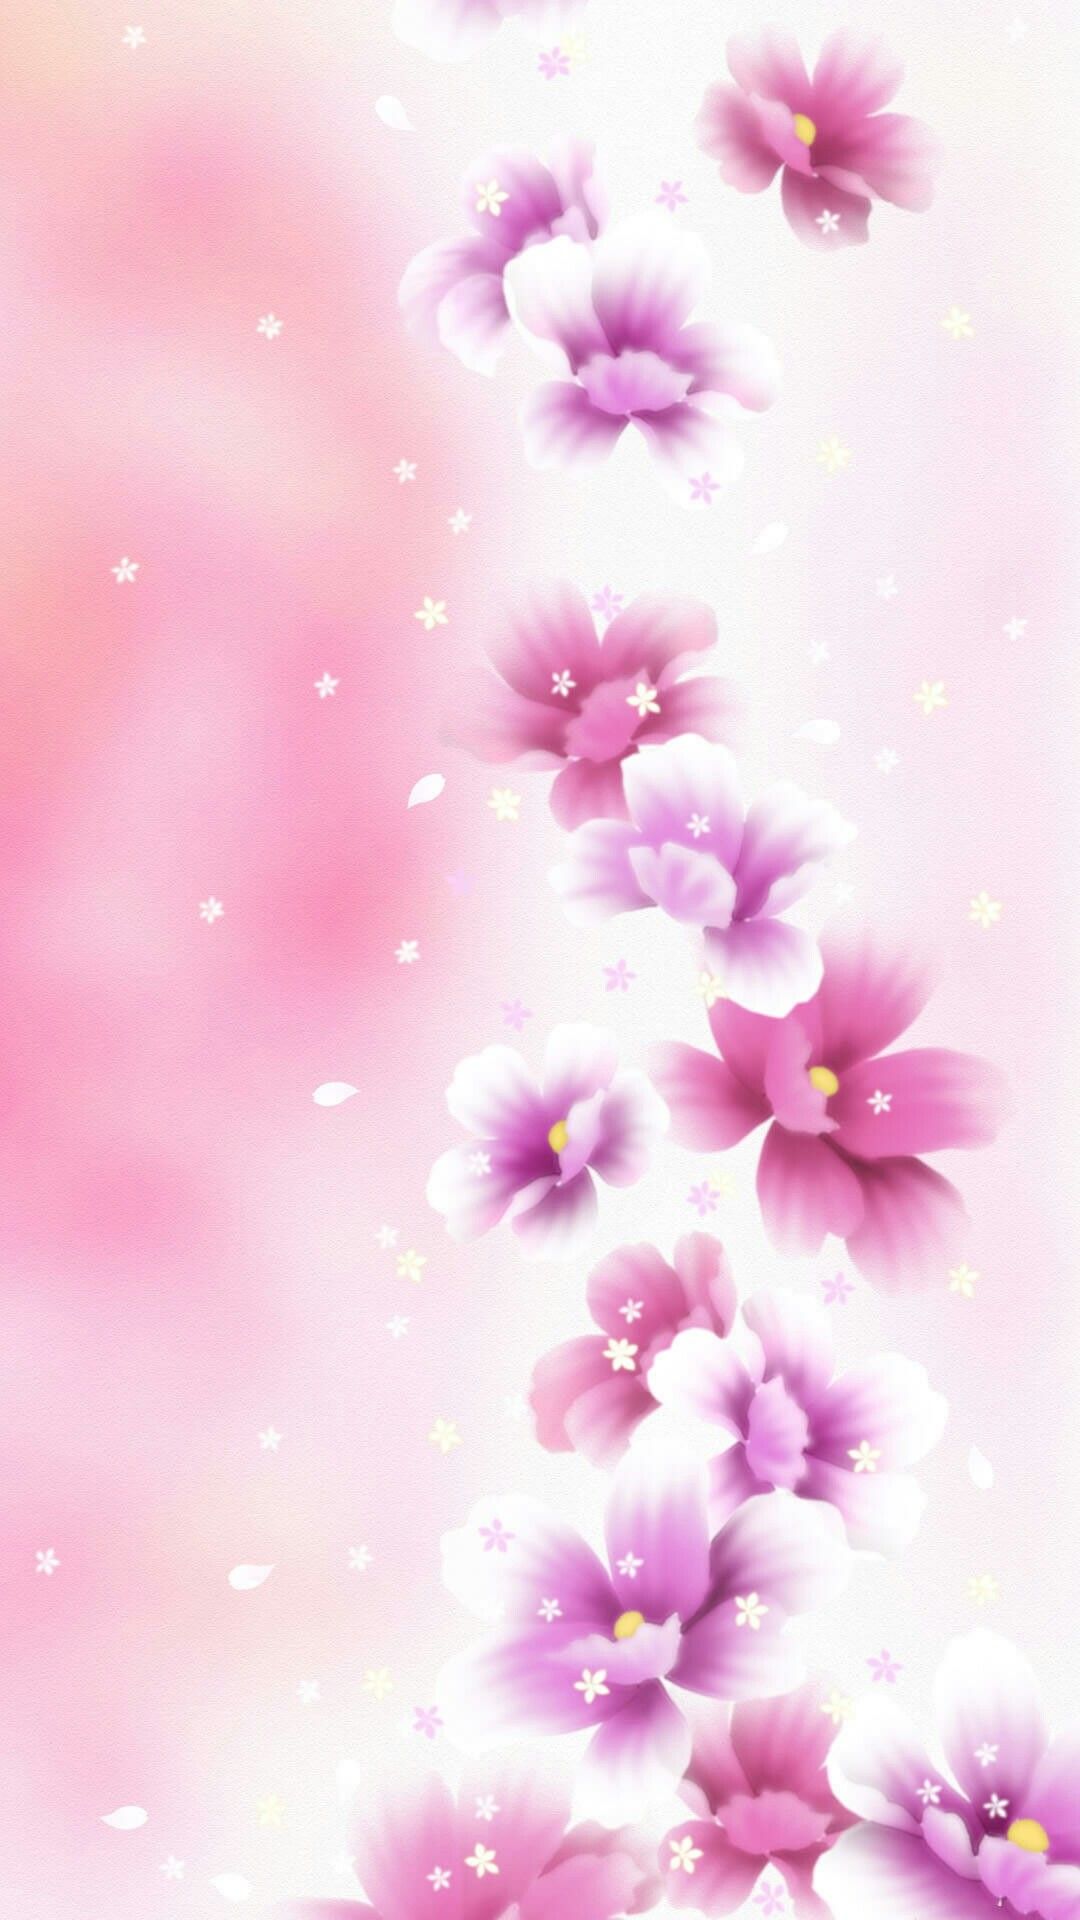 Jewels Marie On Iphone Wallpaper - Cute Wallpapers For Phone , HD Wallpaper & Backgrounds